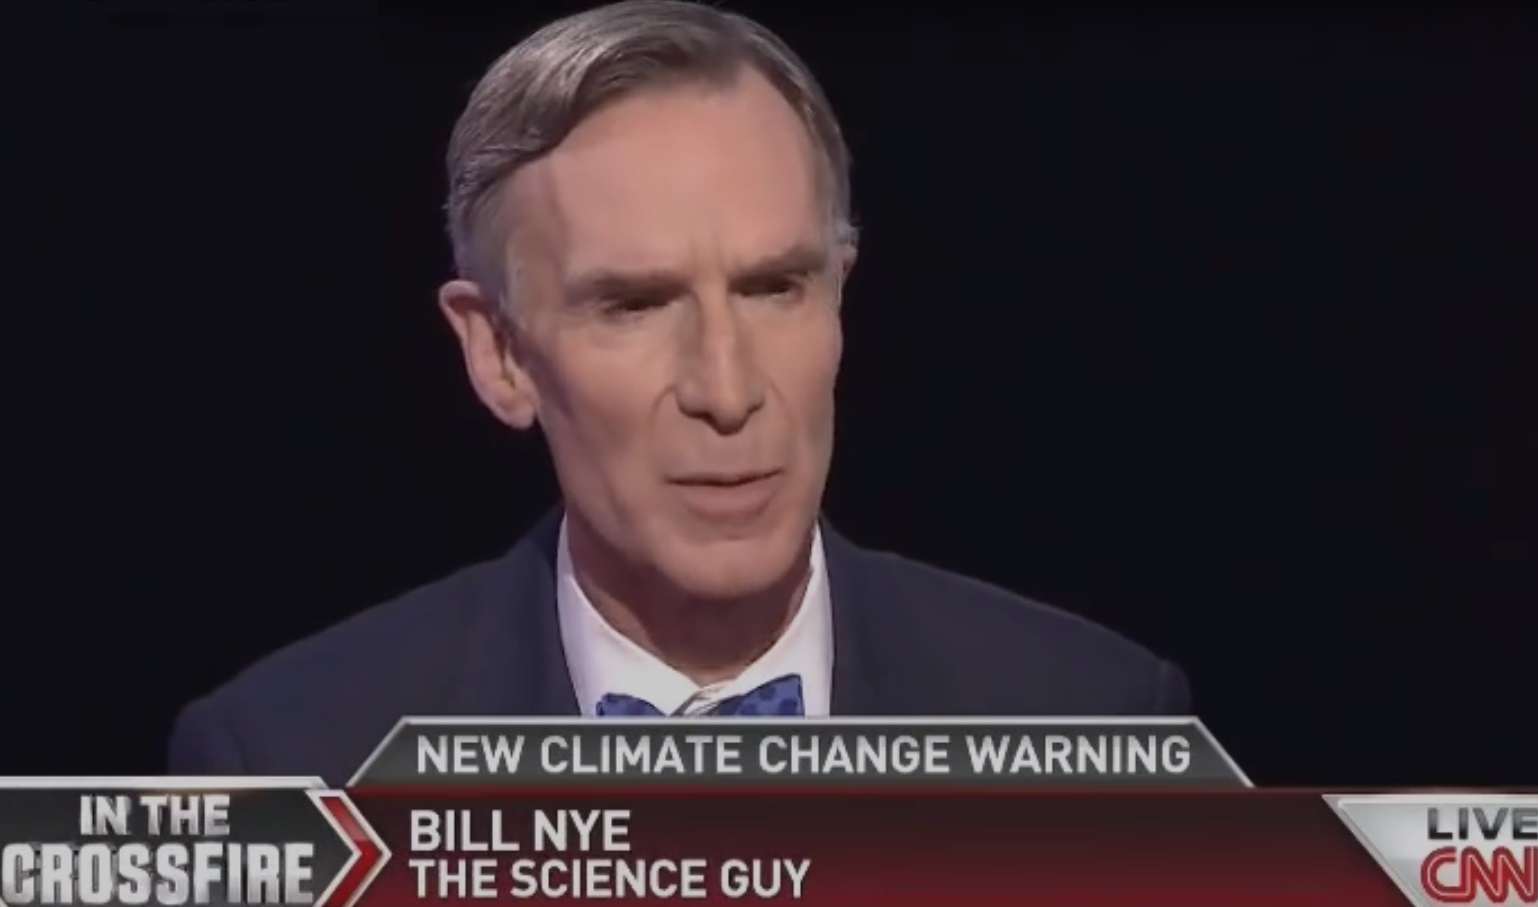 Bill Nye the science guy climate change global warming CNN interview